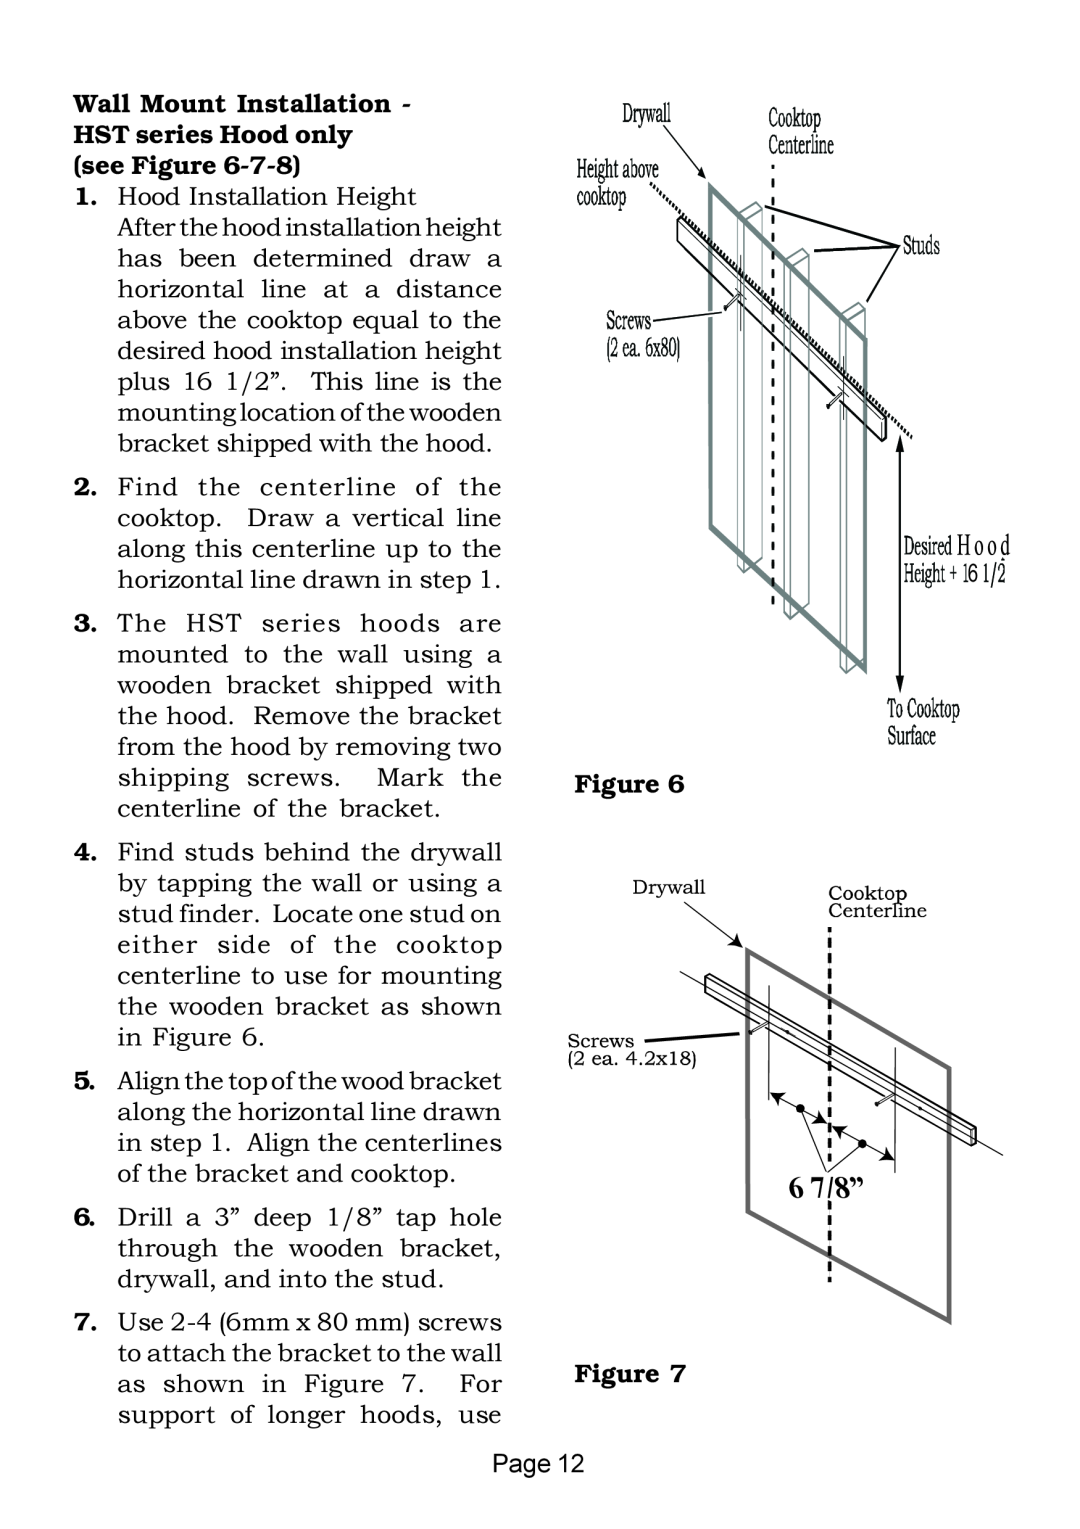 Thermador HS-HST-HSB installation instructions Wall Mount Installation - HST series Hood only see Figure, 67/8” 